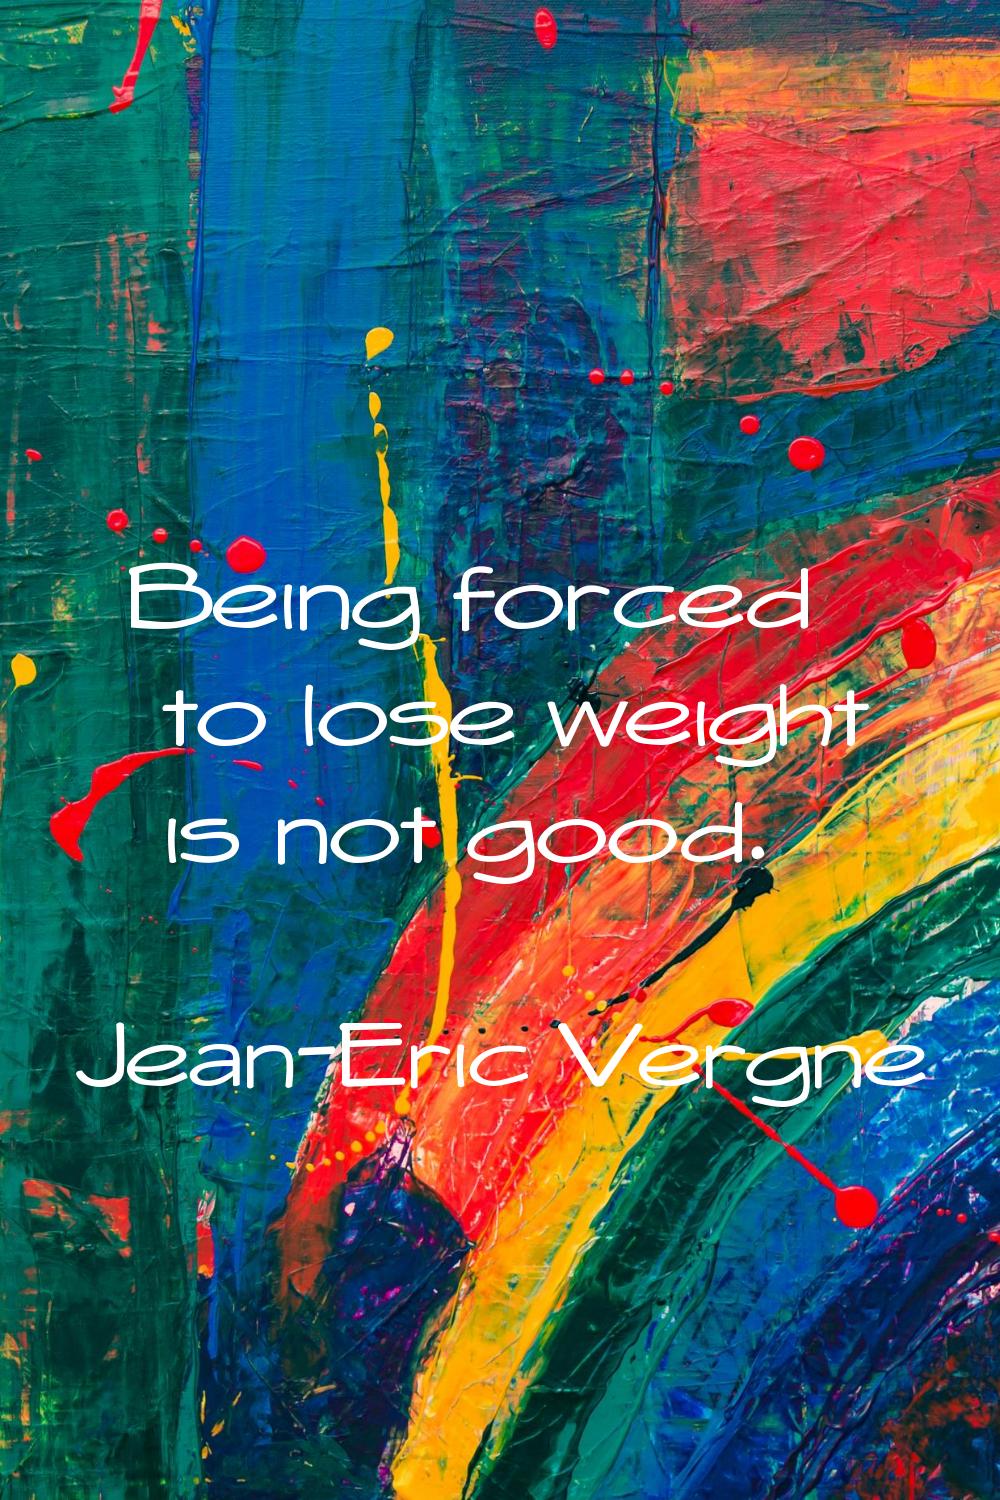 Being forced to lose weight is not good.